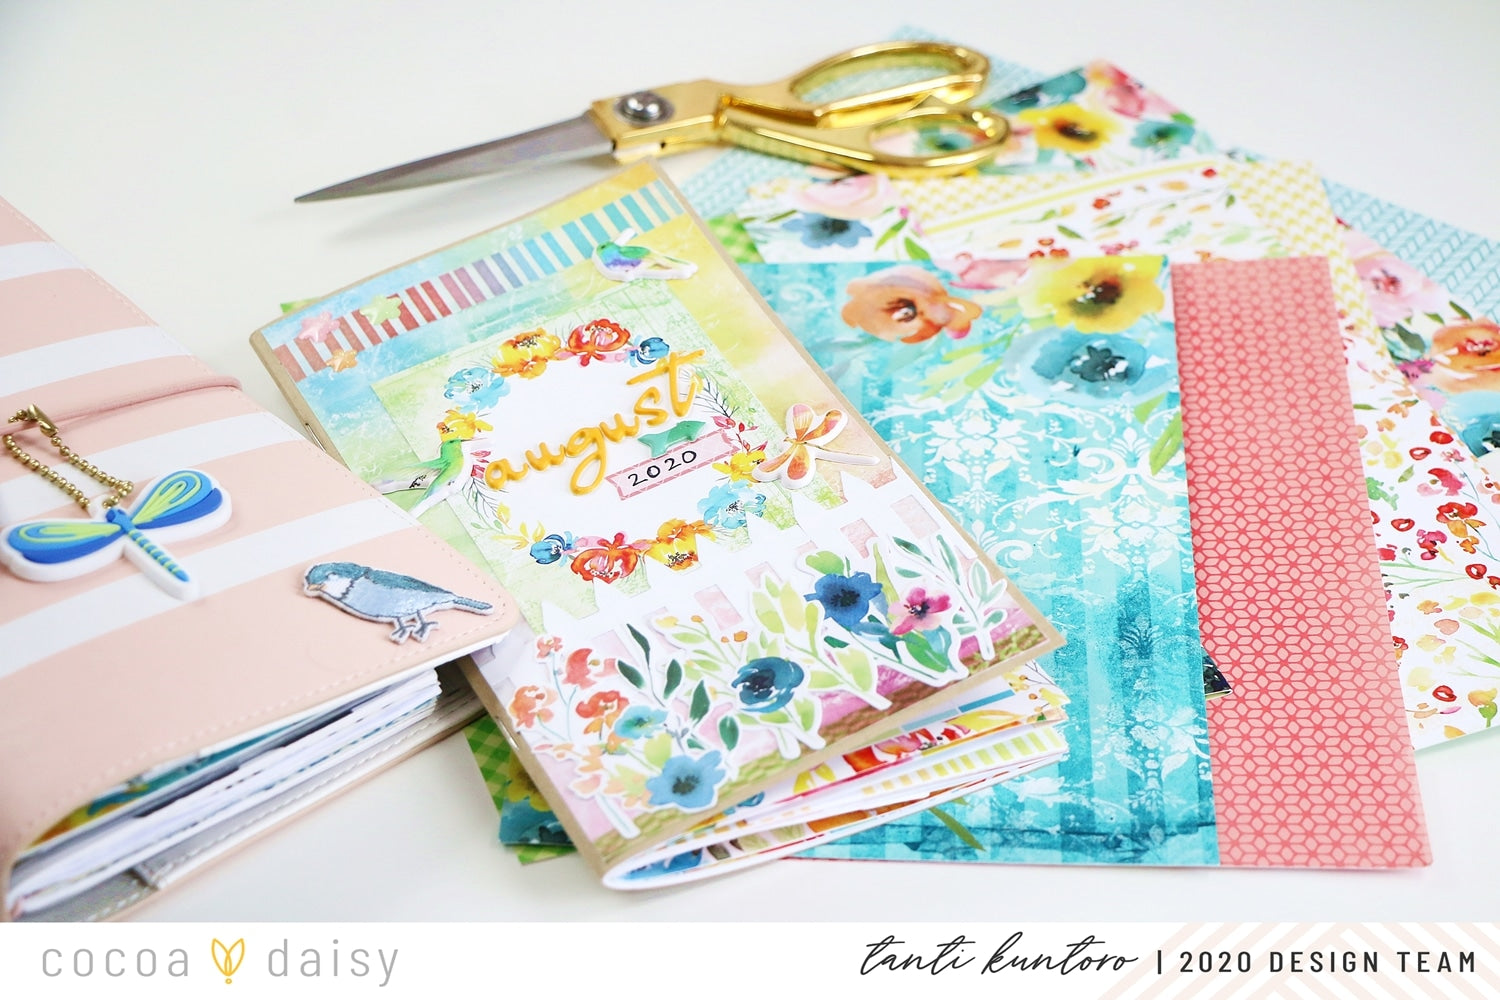 Fun ways to use your patterned papers.